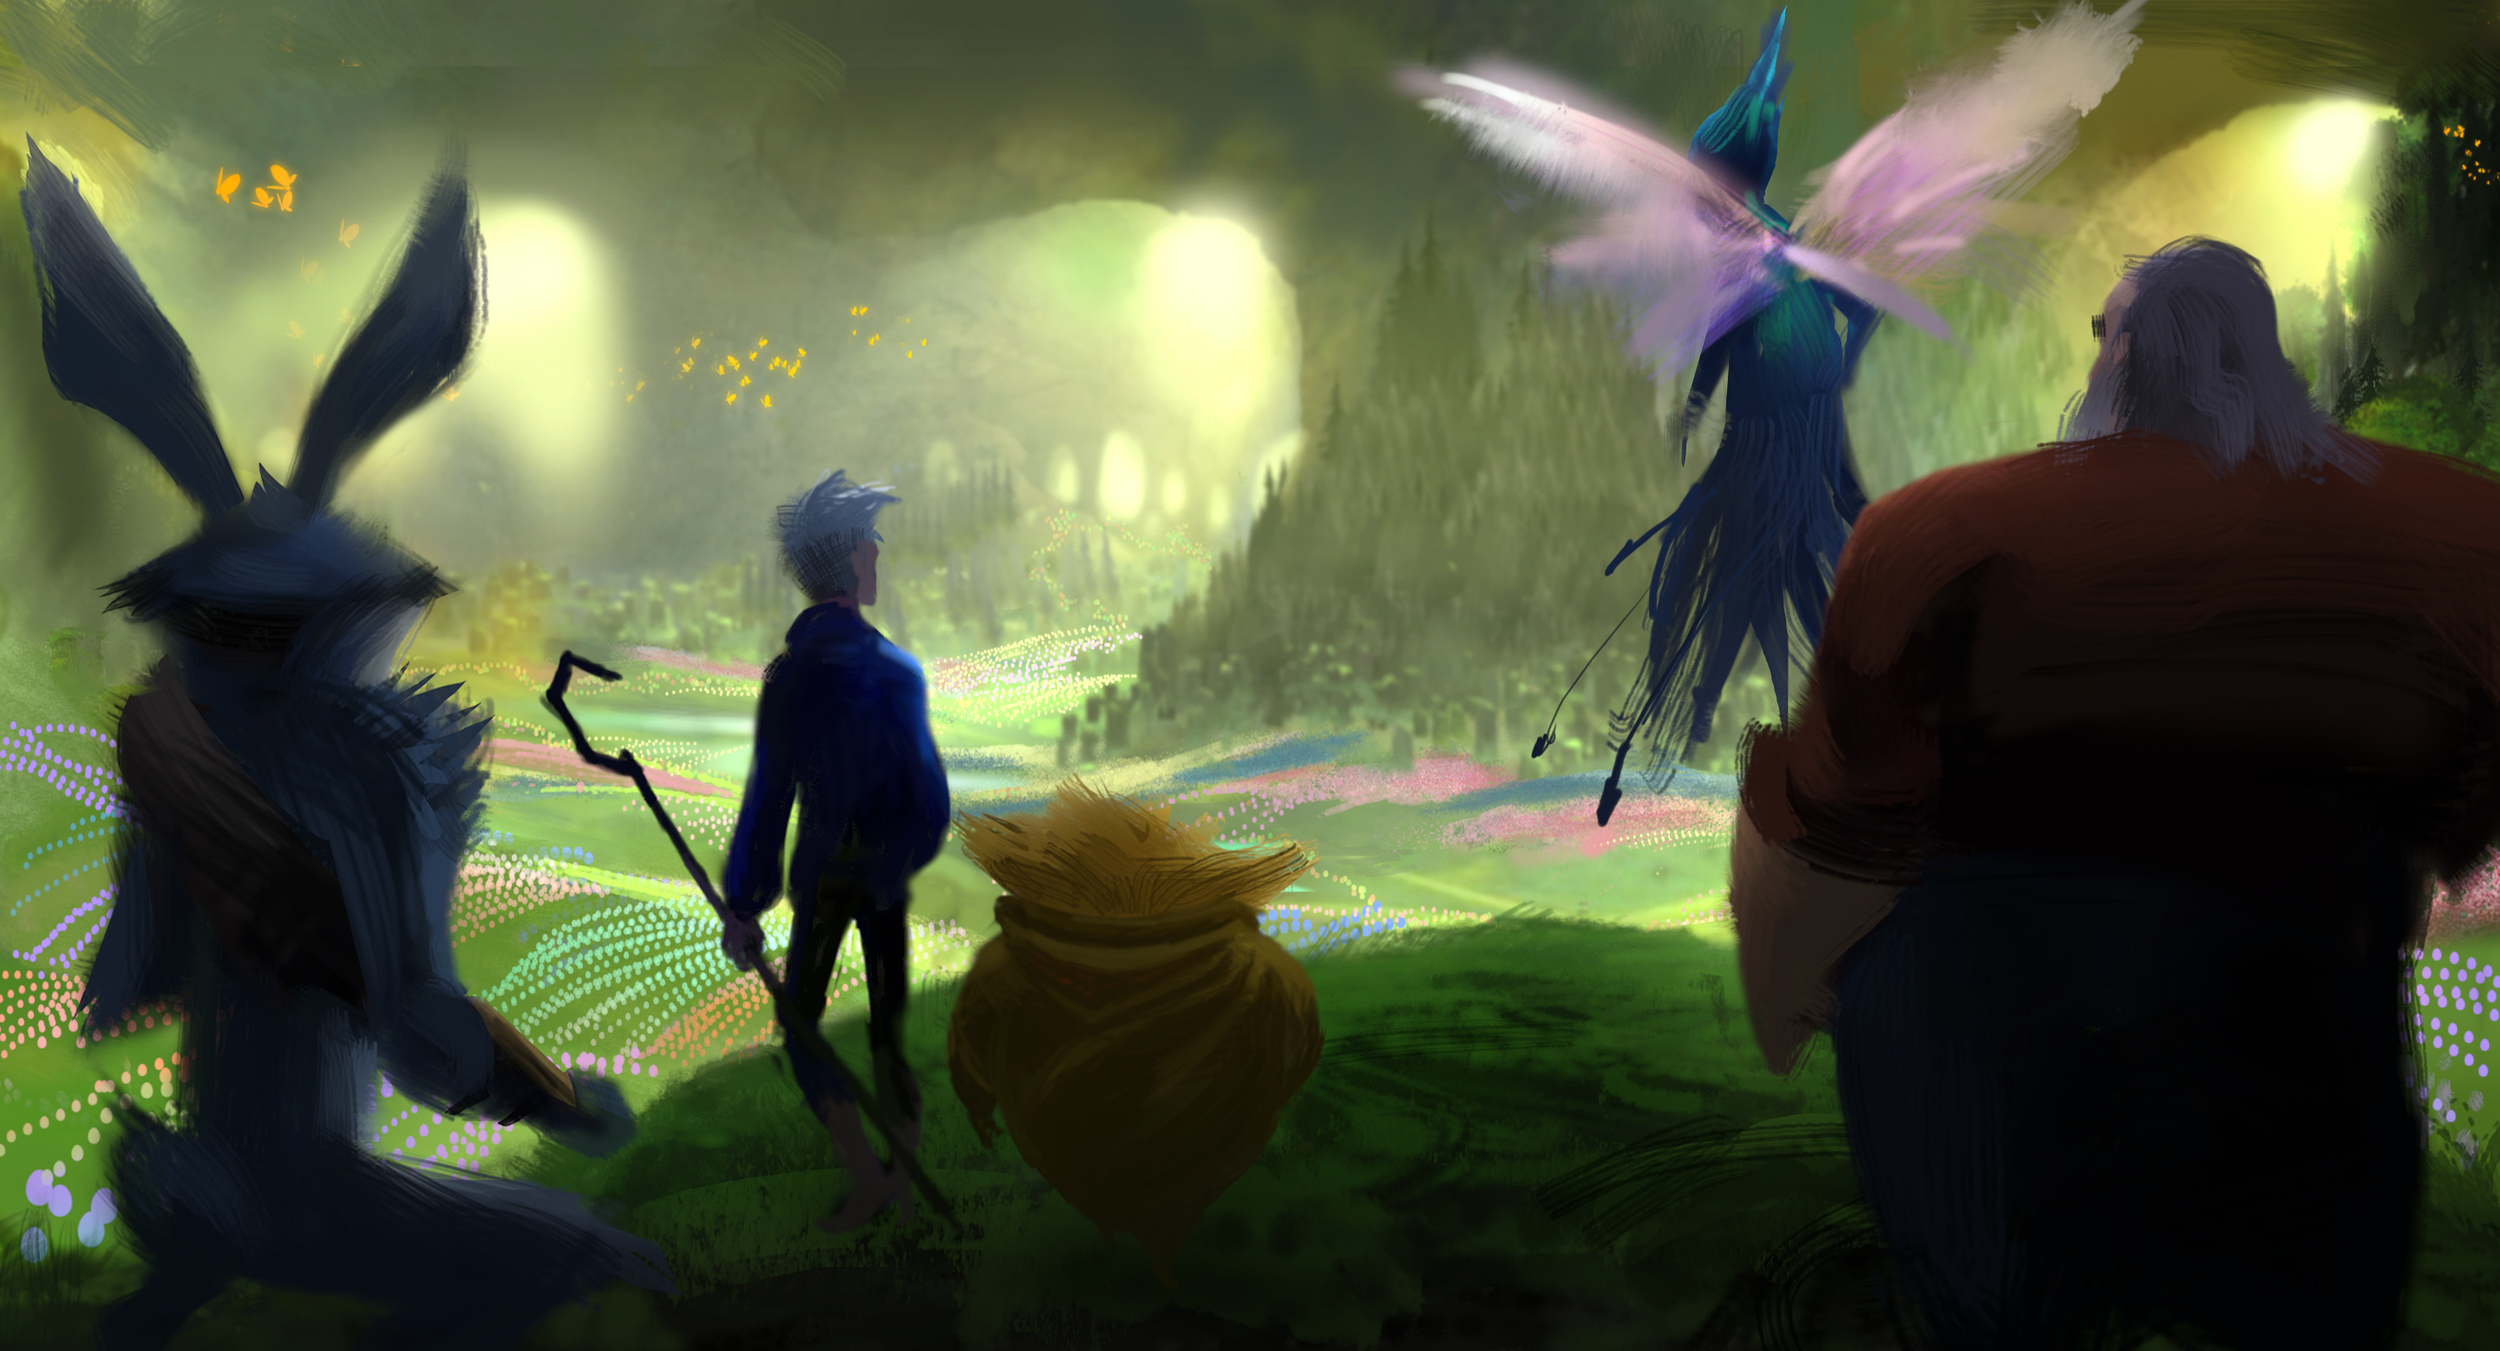  Rise of The Guardians, DWA Concept painting - Bunnymund location 